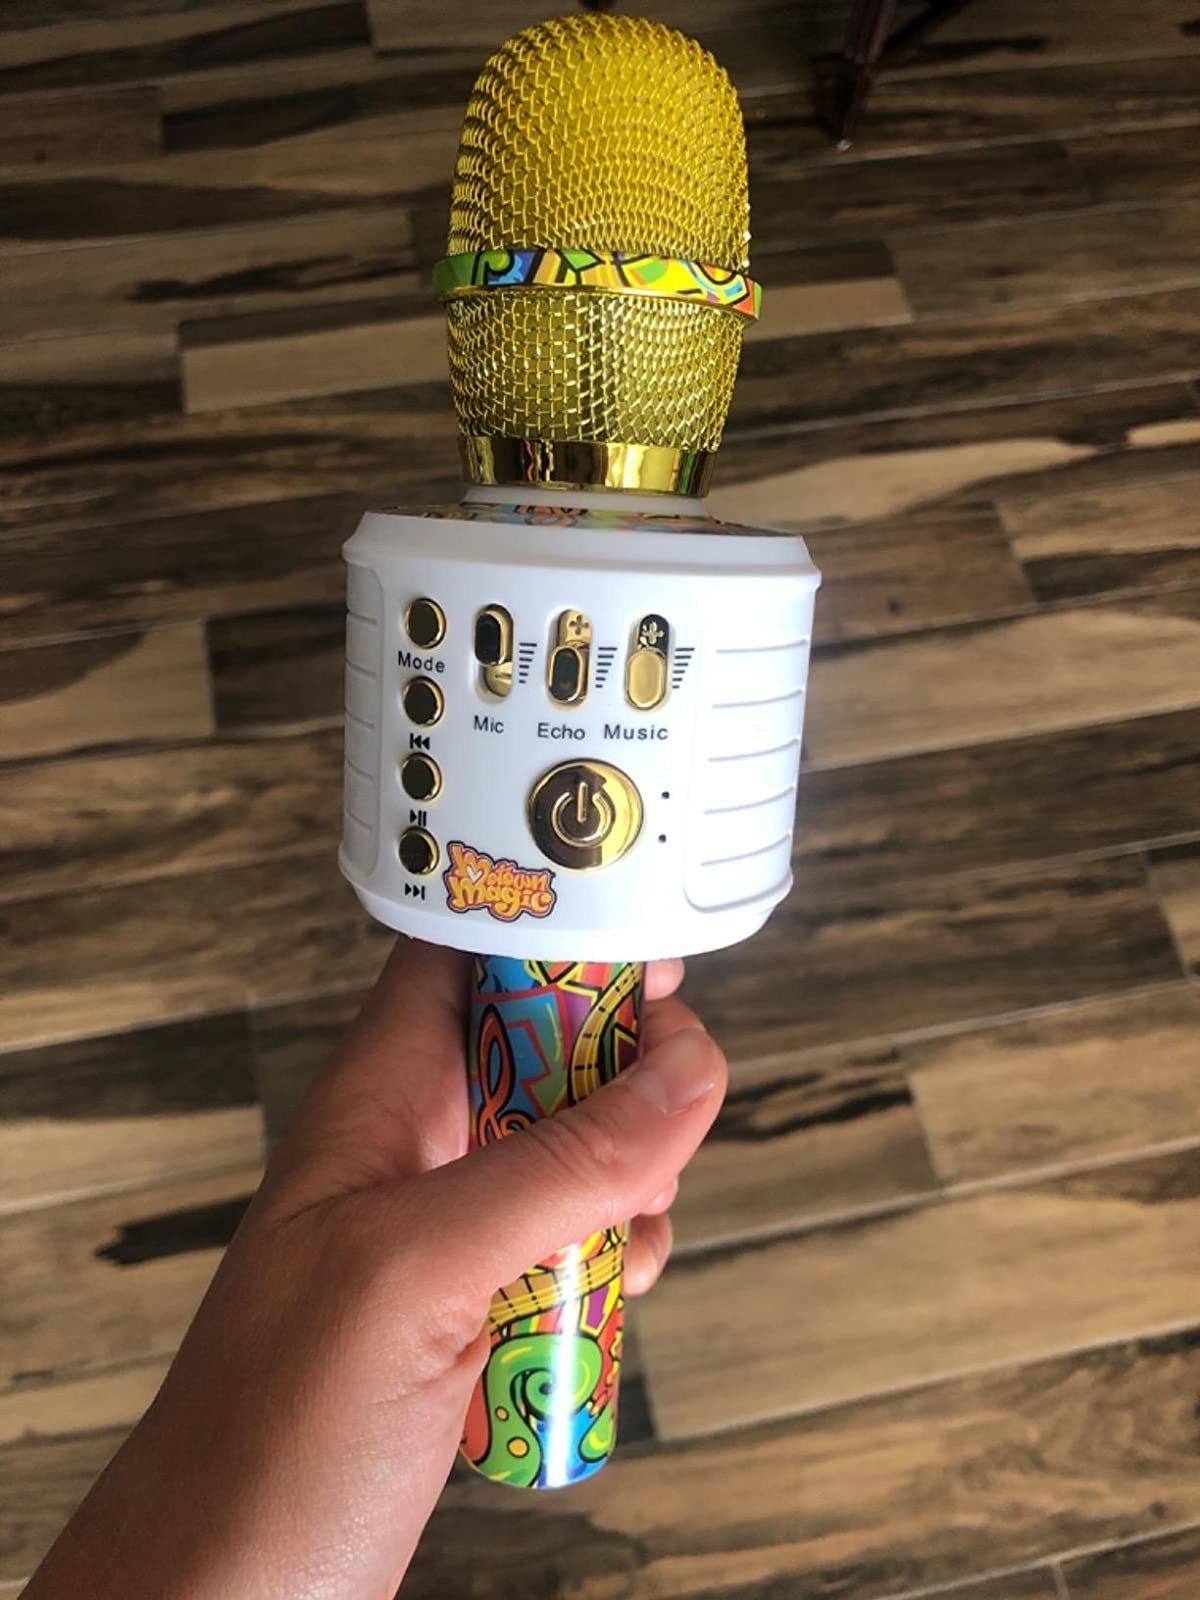 Reviewer's image of hand holding toy microphone